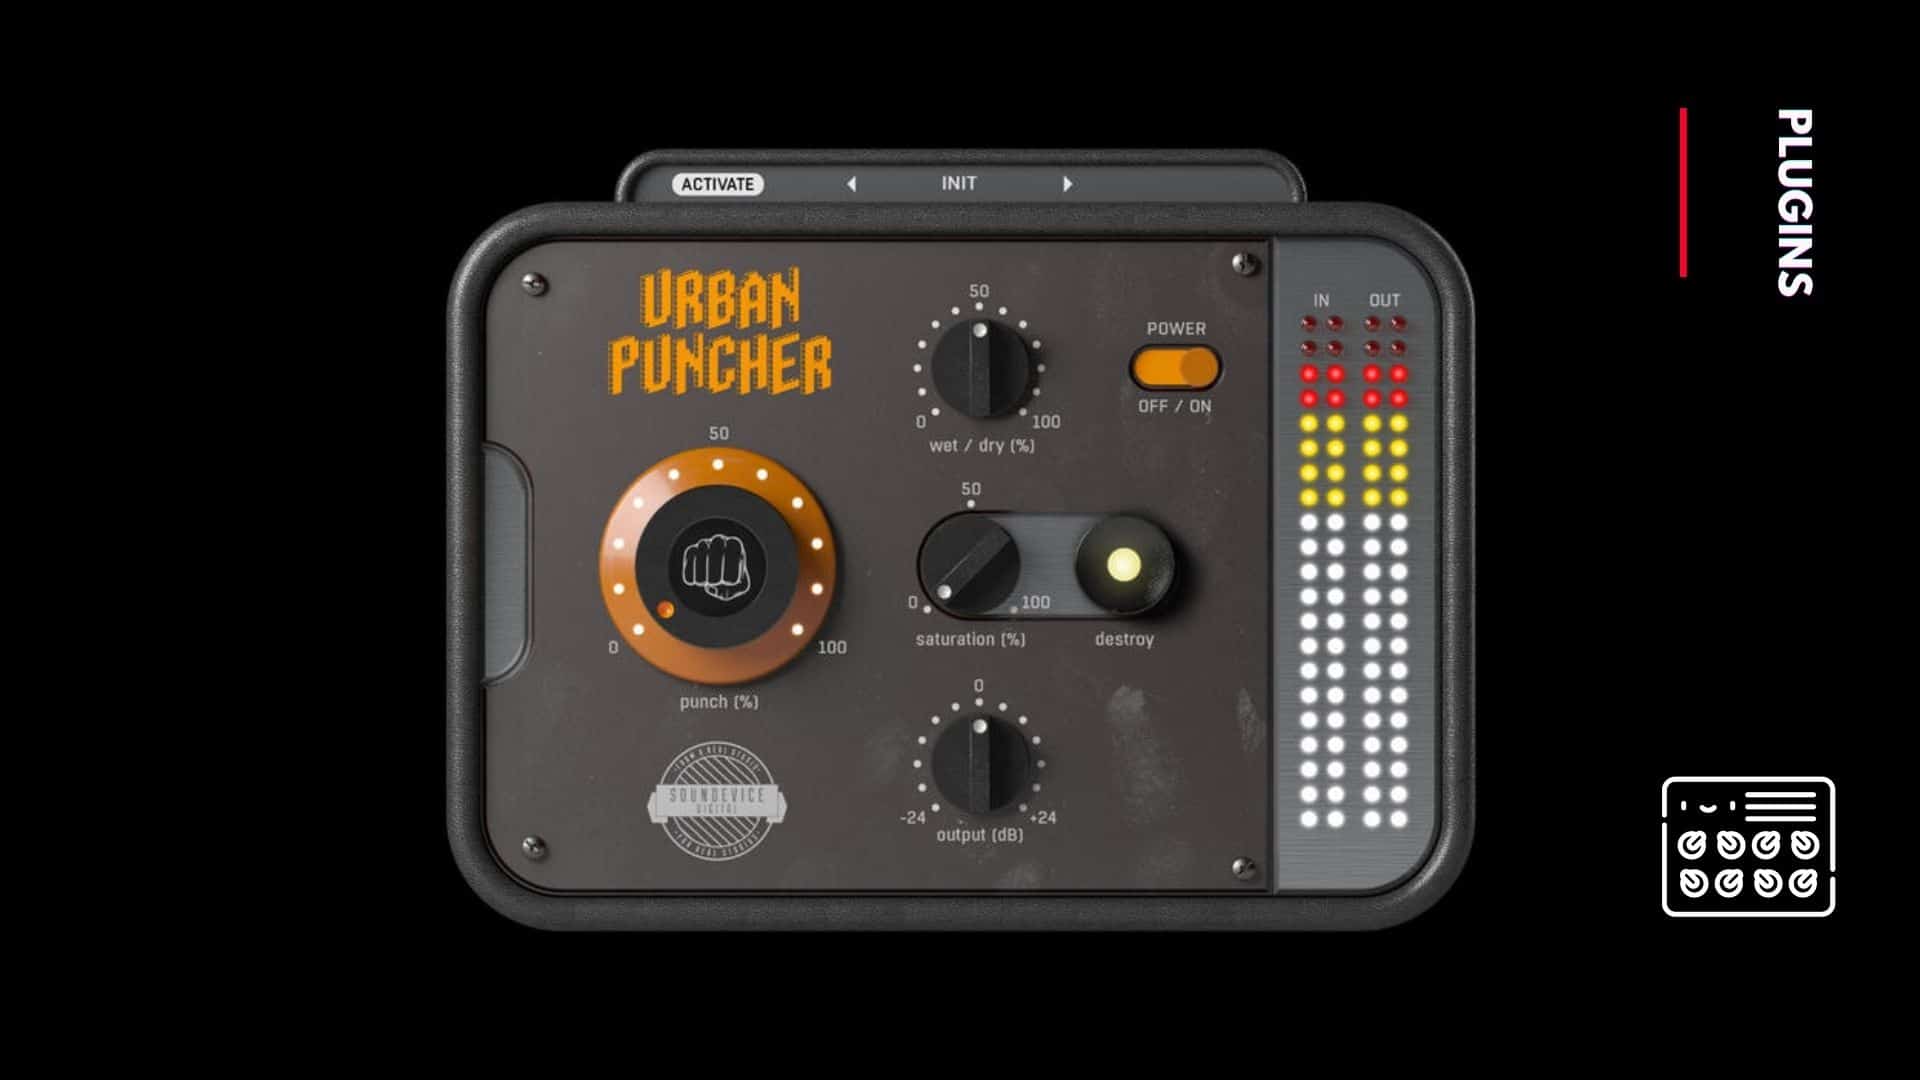 Review: Urban Puncher by United Plugins